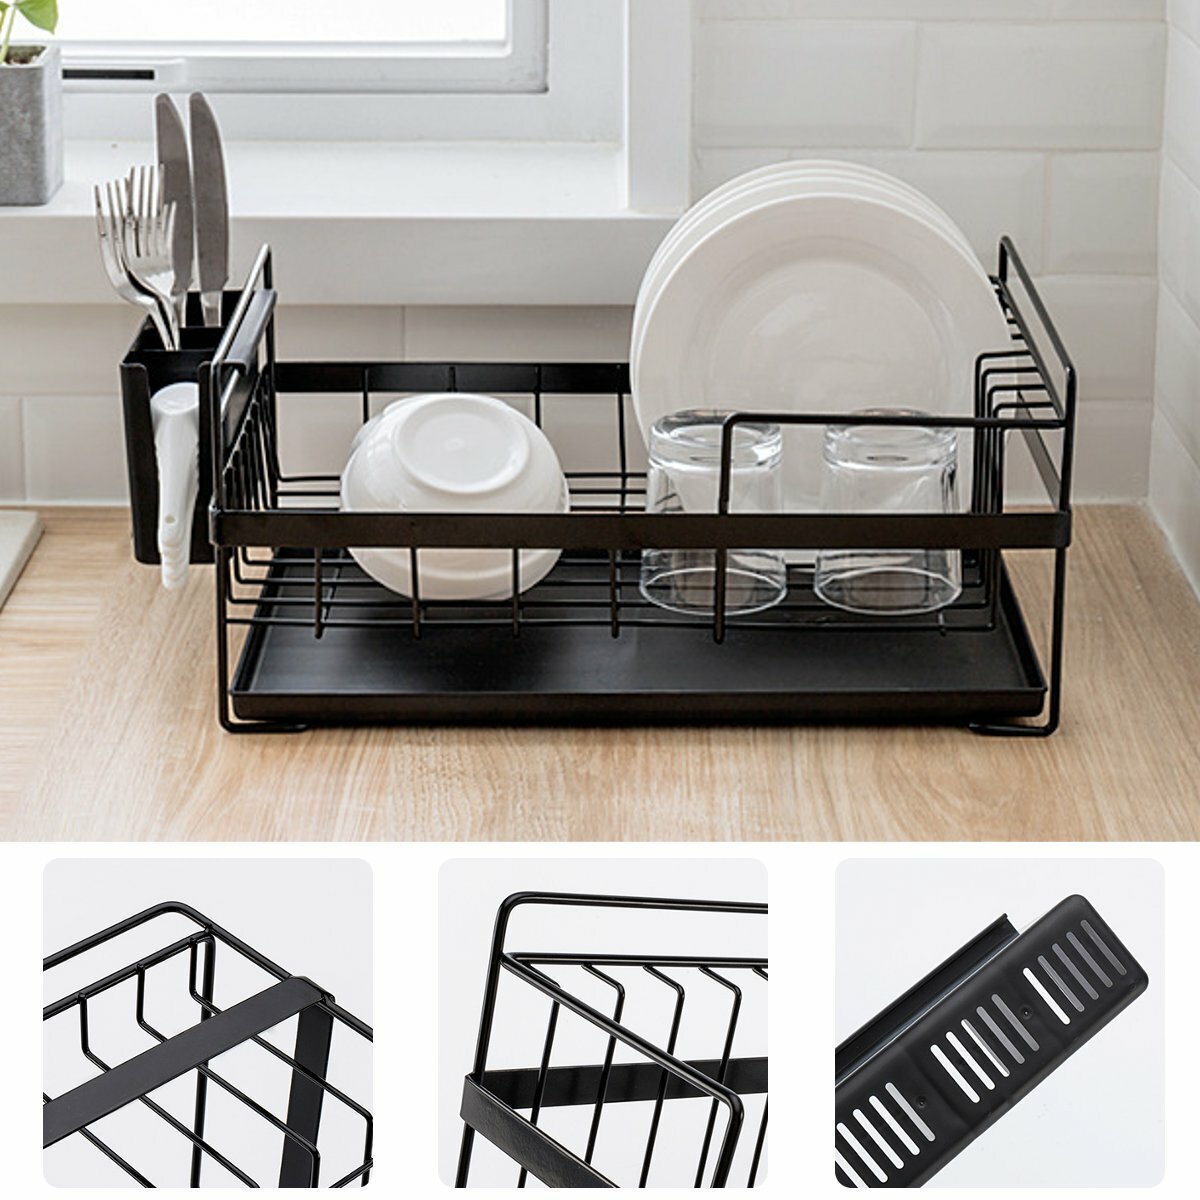 Multifunction Kitchen Storage Organizer Dish Drainer Drying Rack Iron Sink Holder Tray For Plate Cup Bowl Tableware Shel